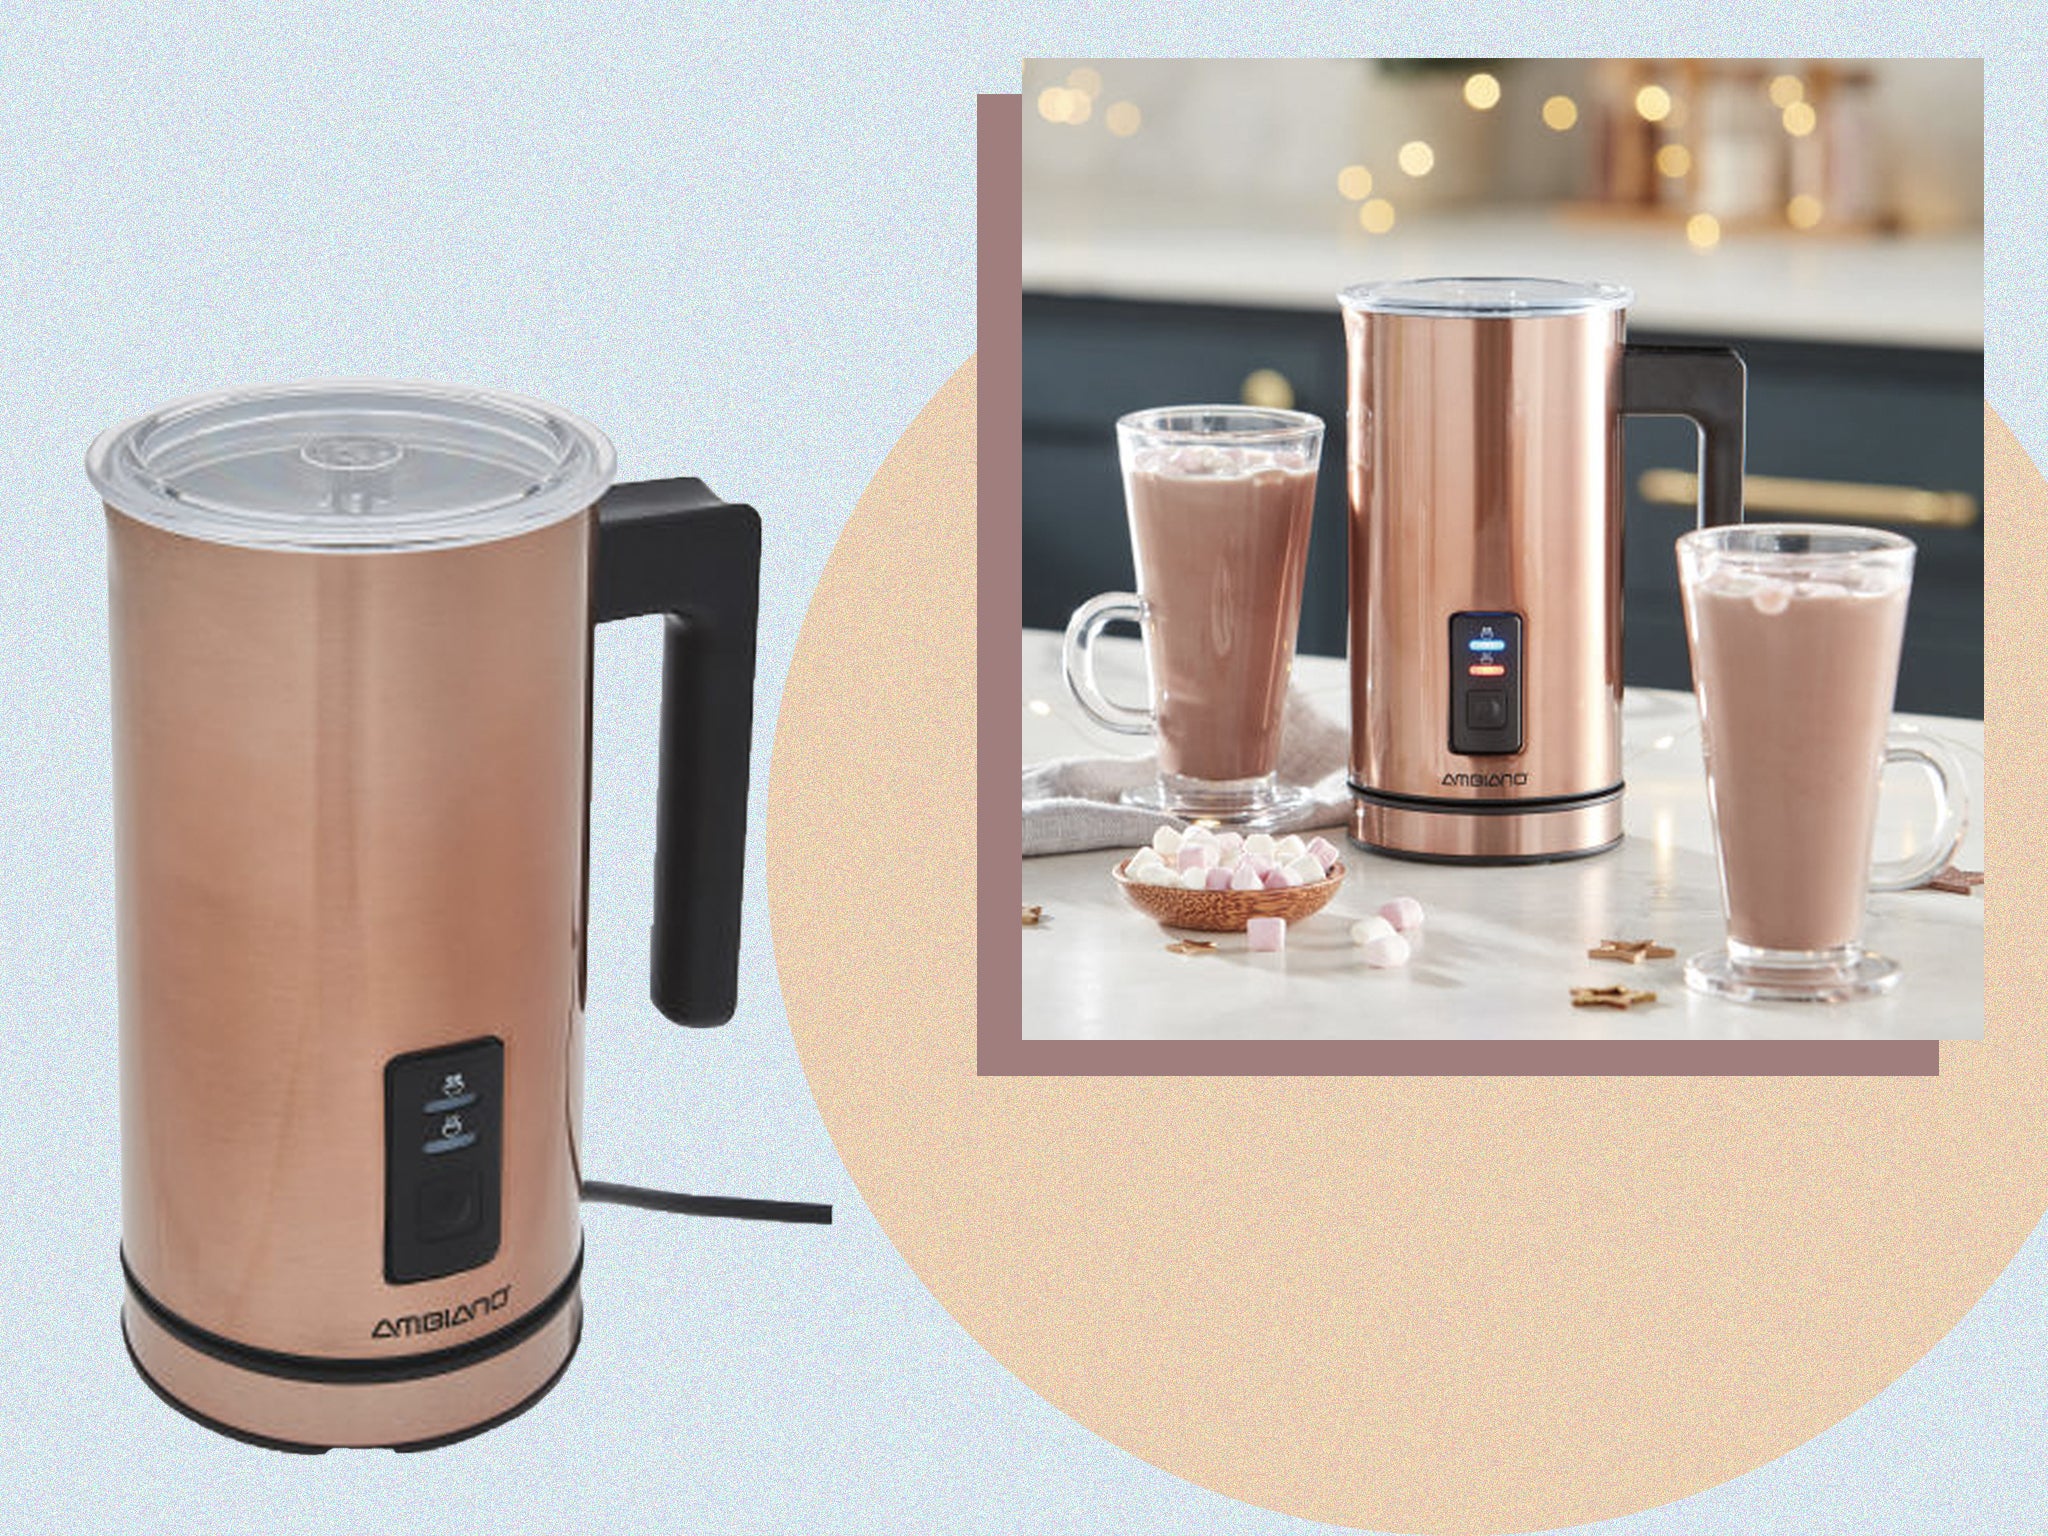 The appliance allows you to froth hot and cold milk